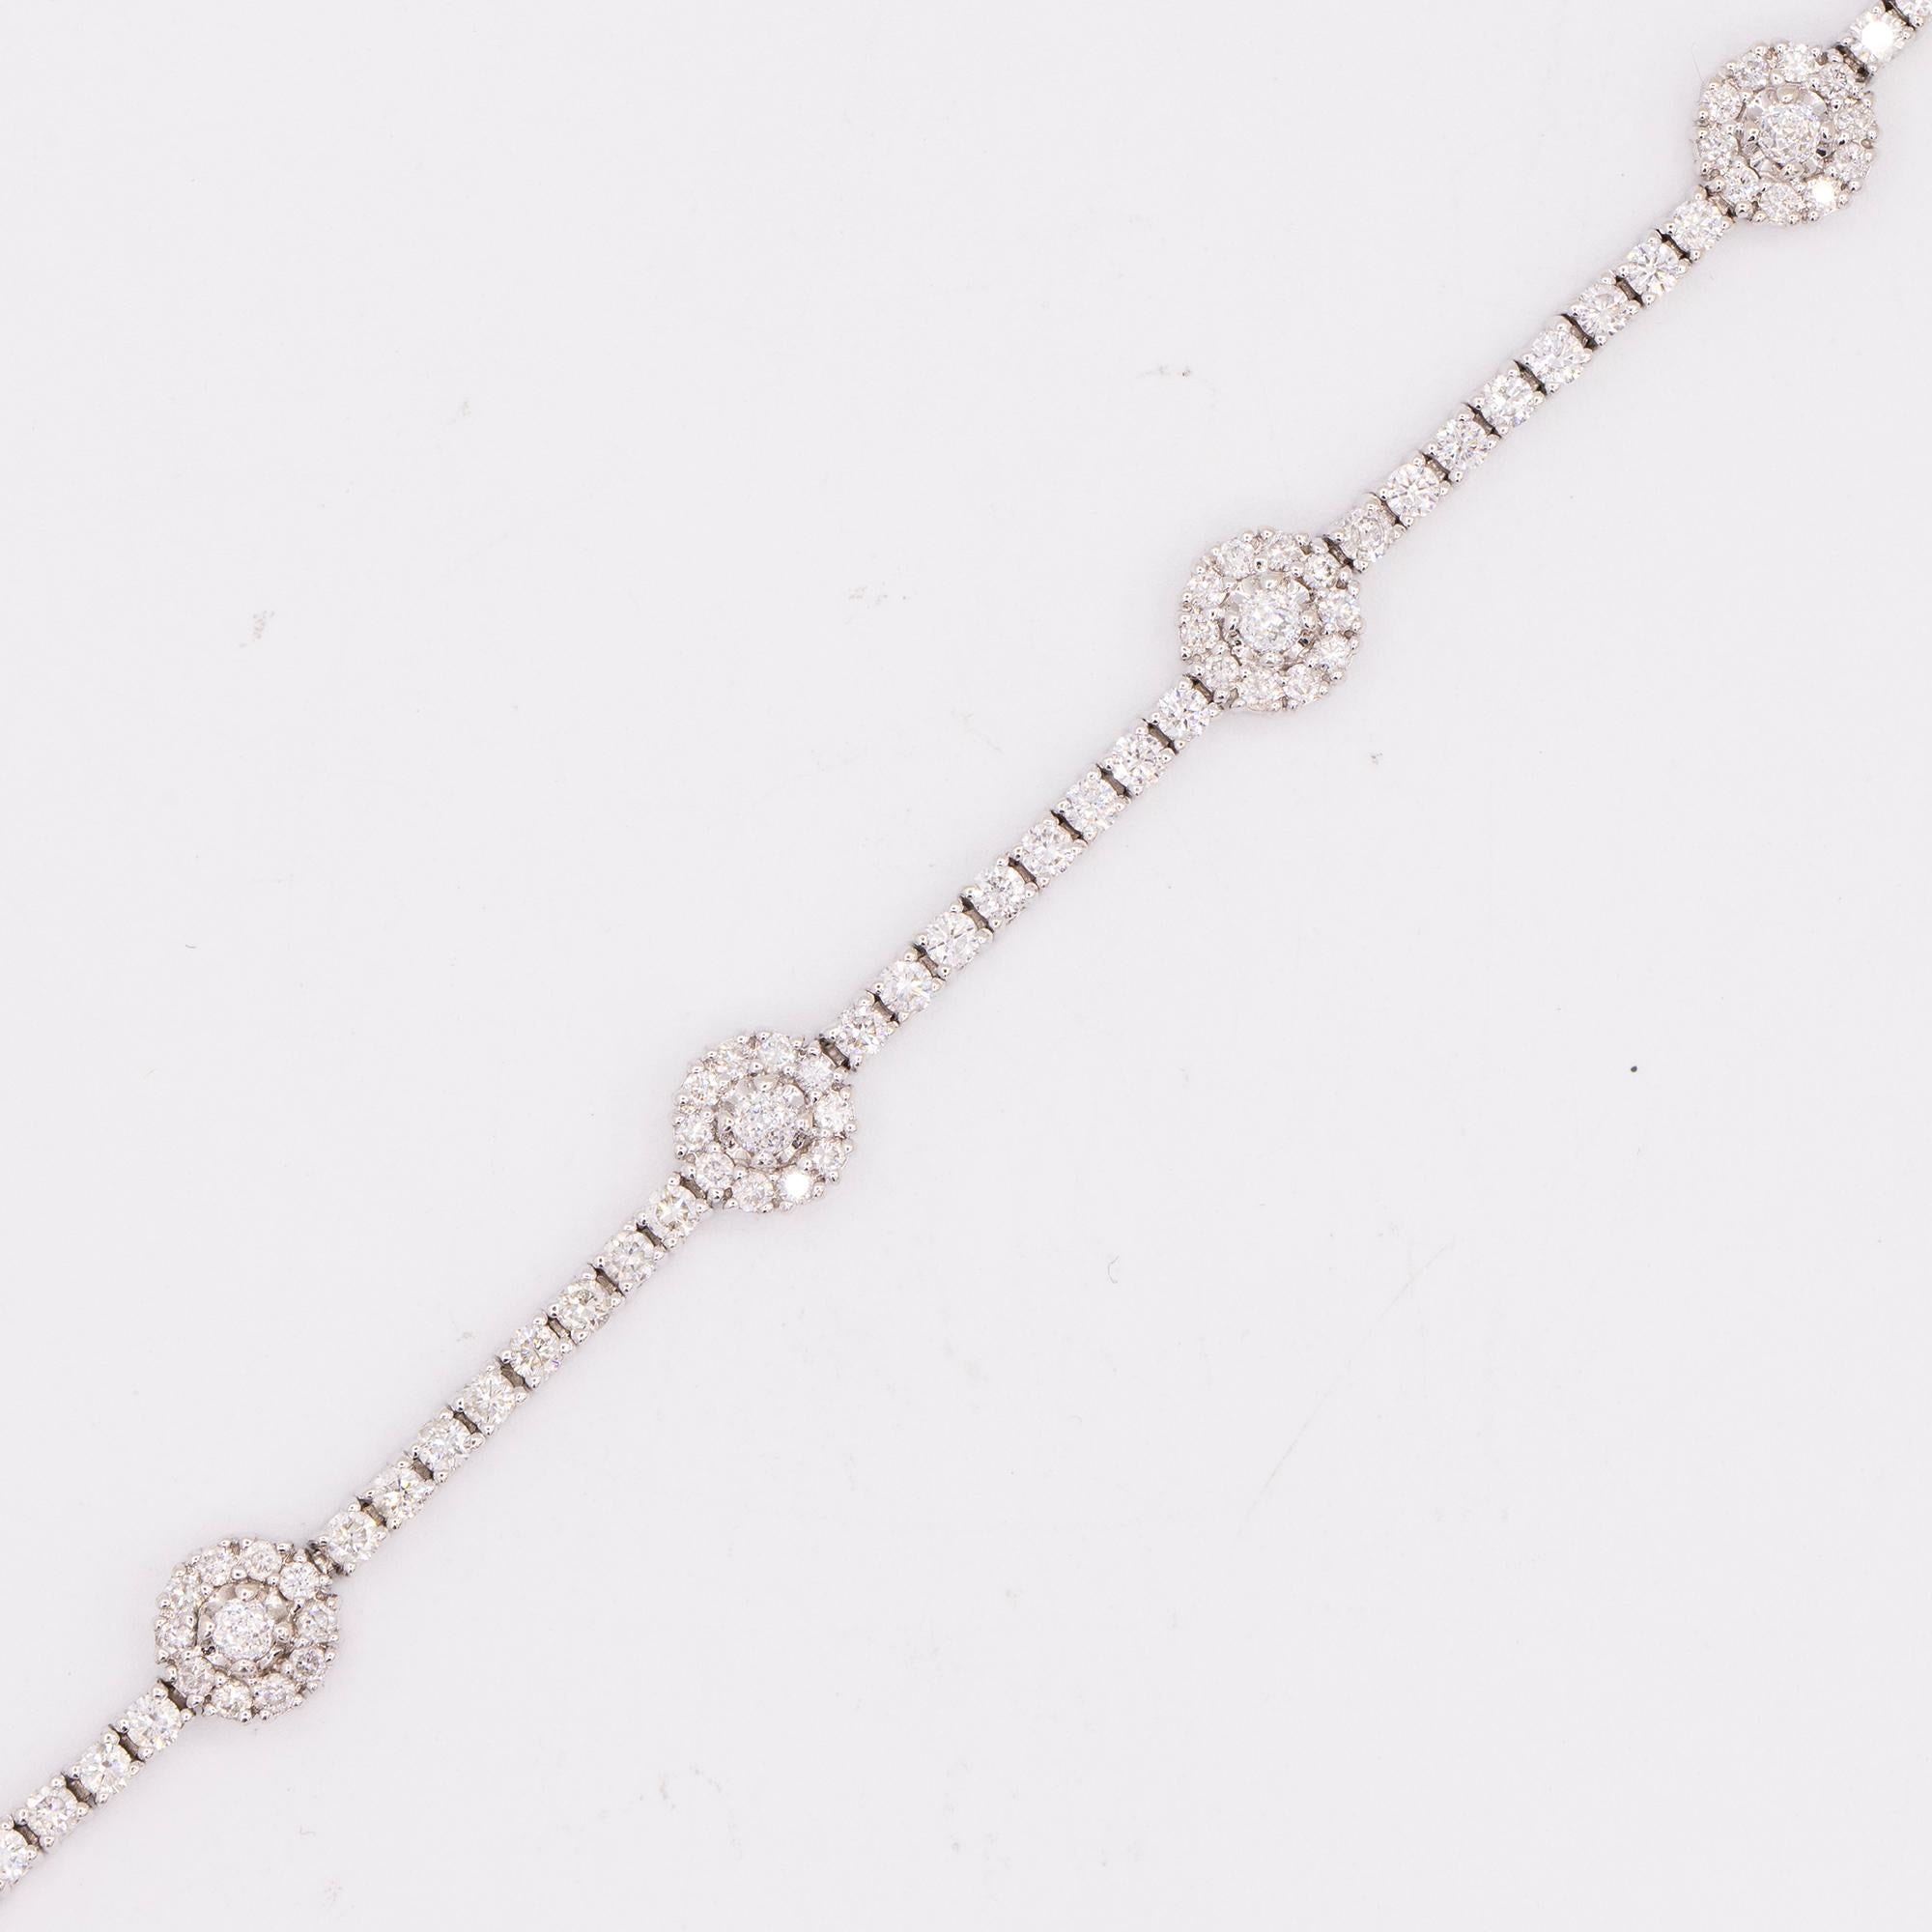 Vintage 14kt diamond station bracelet with 6 flower design stations. The bracelet measures 7.25 inches in length with a safety clasp. There are 115 round brilliant cut diamonds that have a total weight of 2.55 carats. There are 6 bead cut faceted